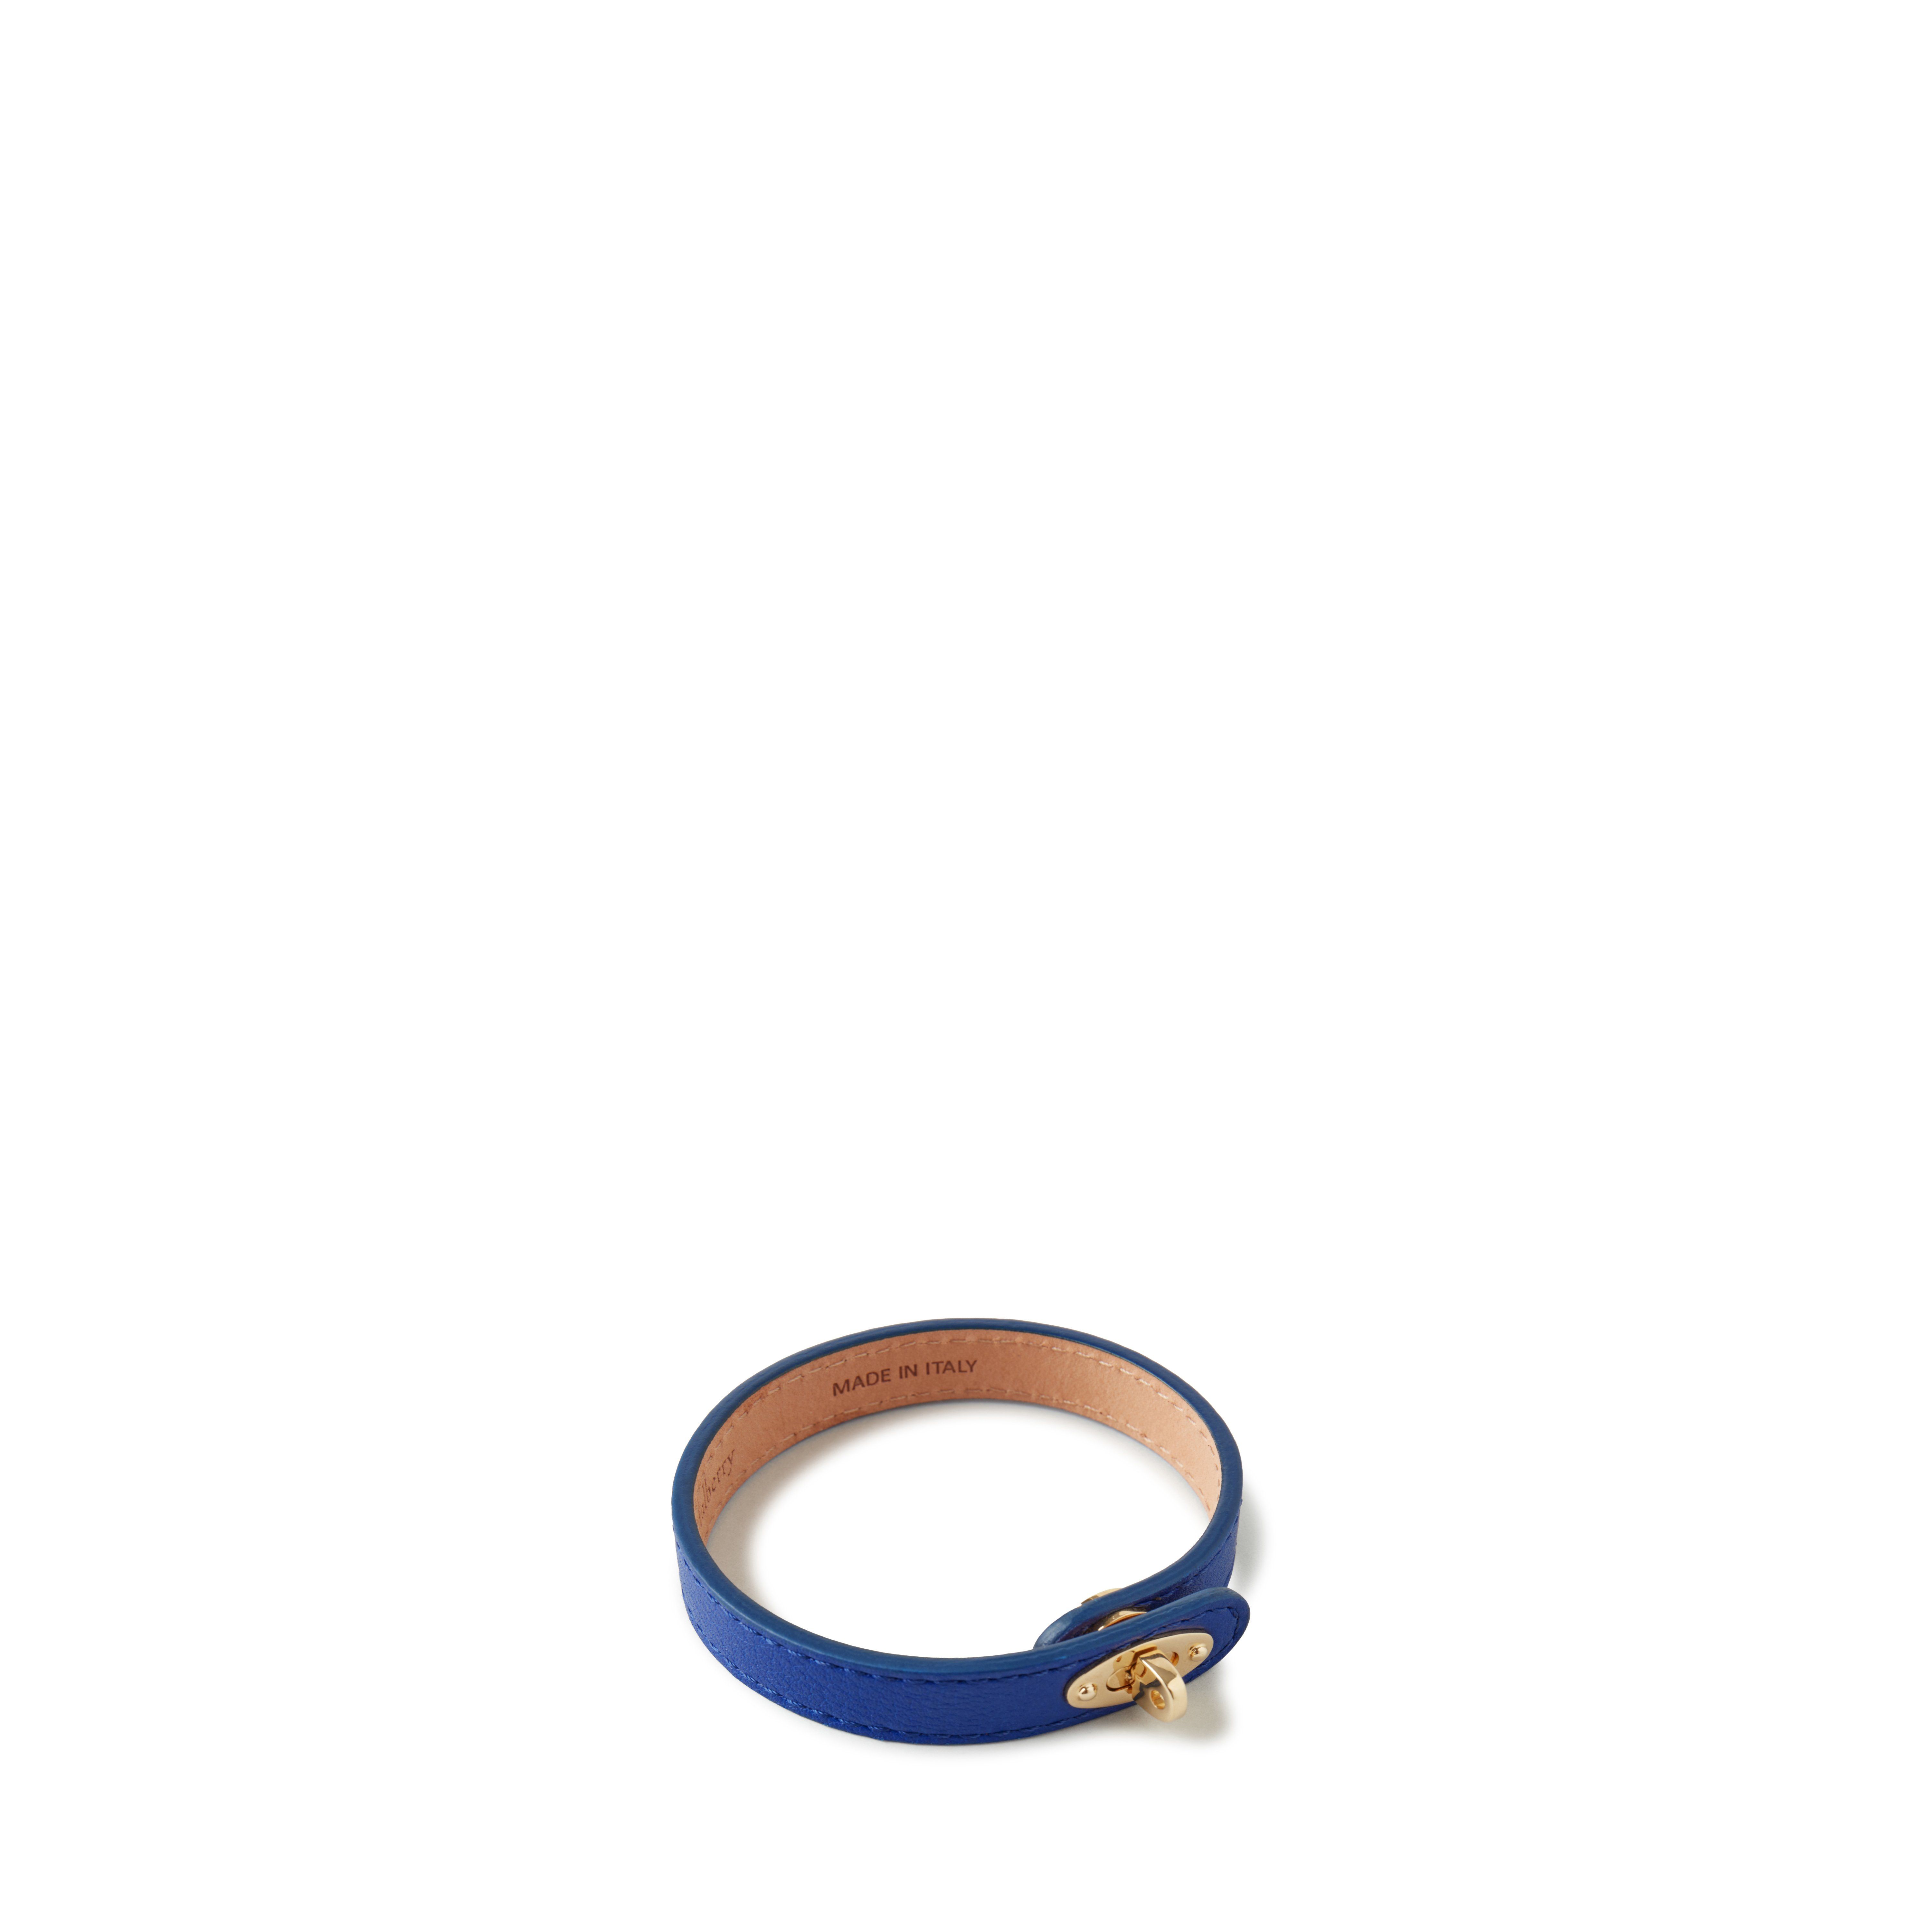 Mulberry Bayswater Thin Bracelet In Pigment Blue